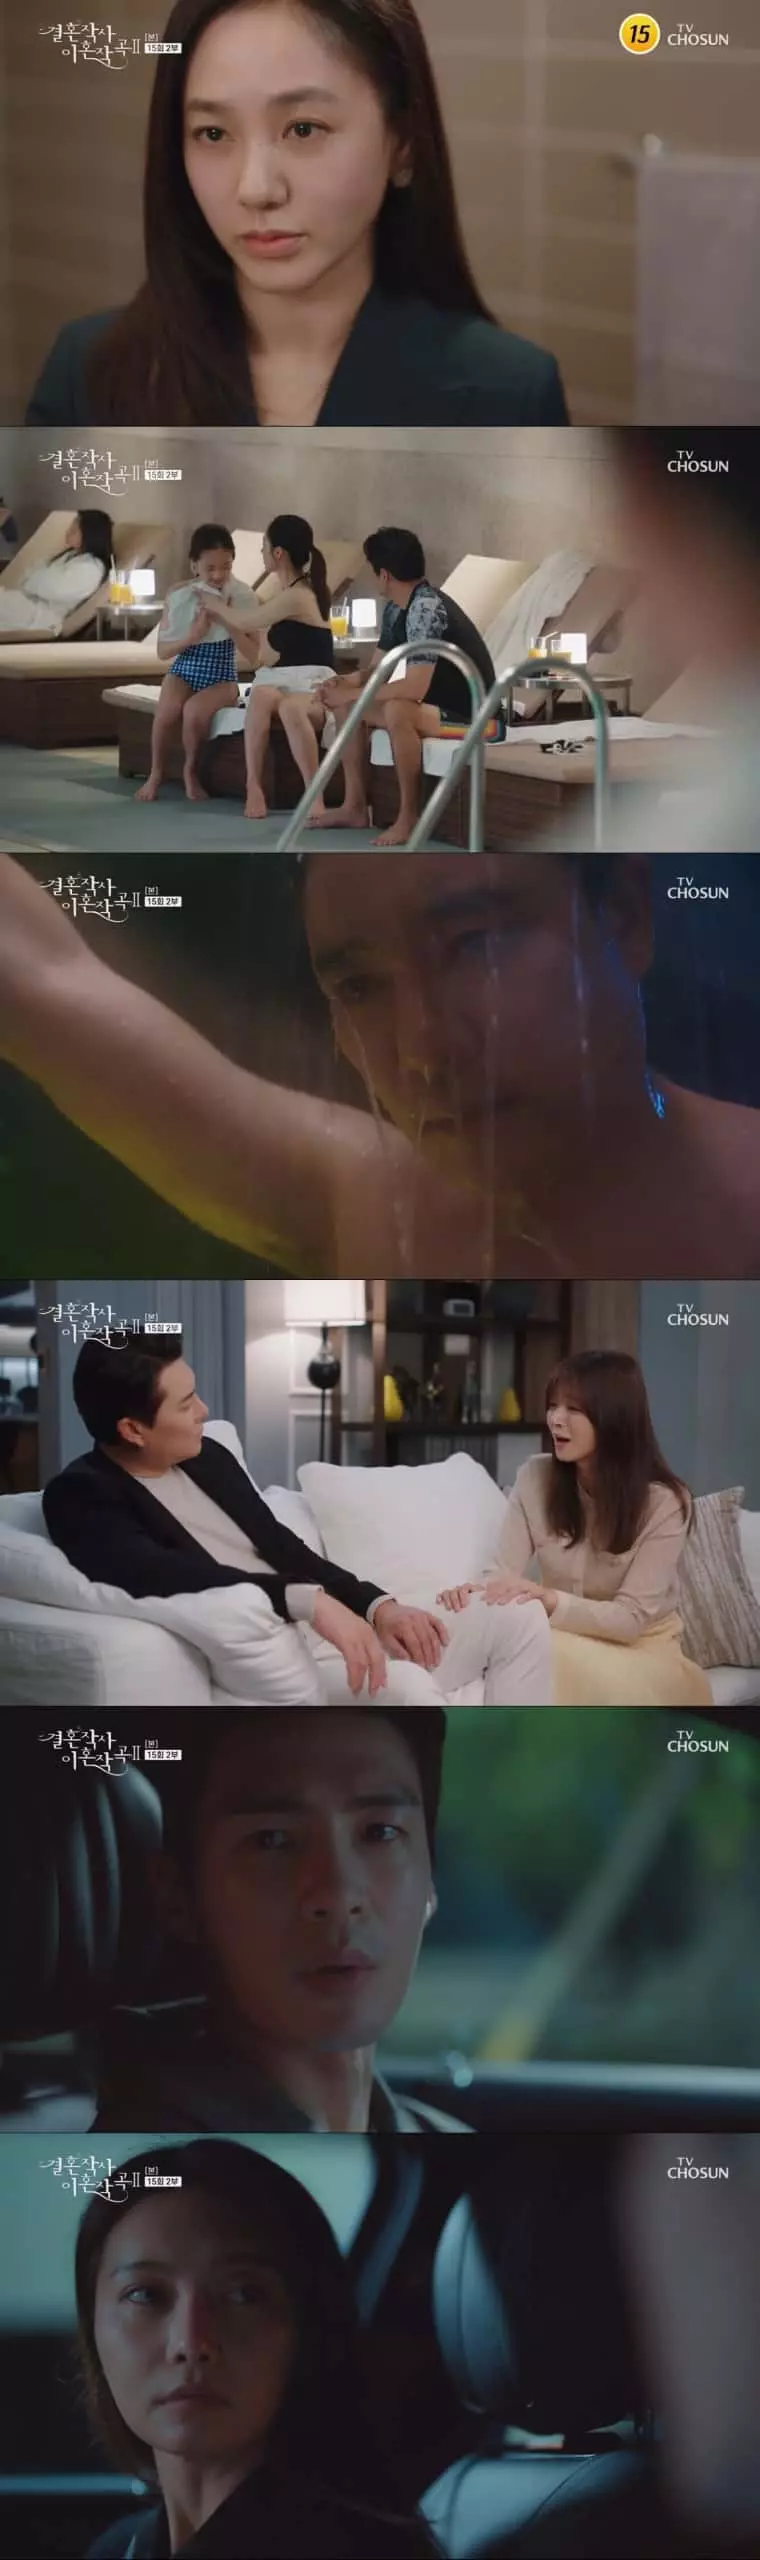 Love (ft. Marriage and Divorce) 2 EP15 สปอยล์